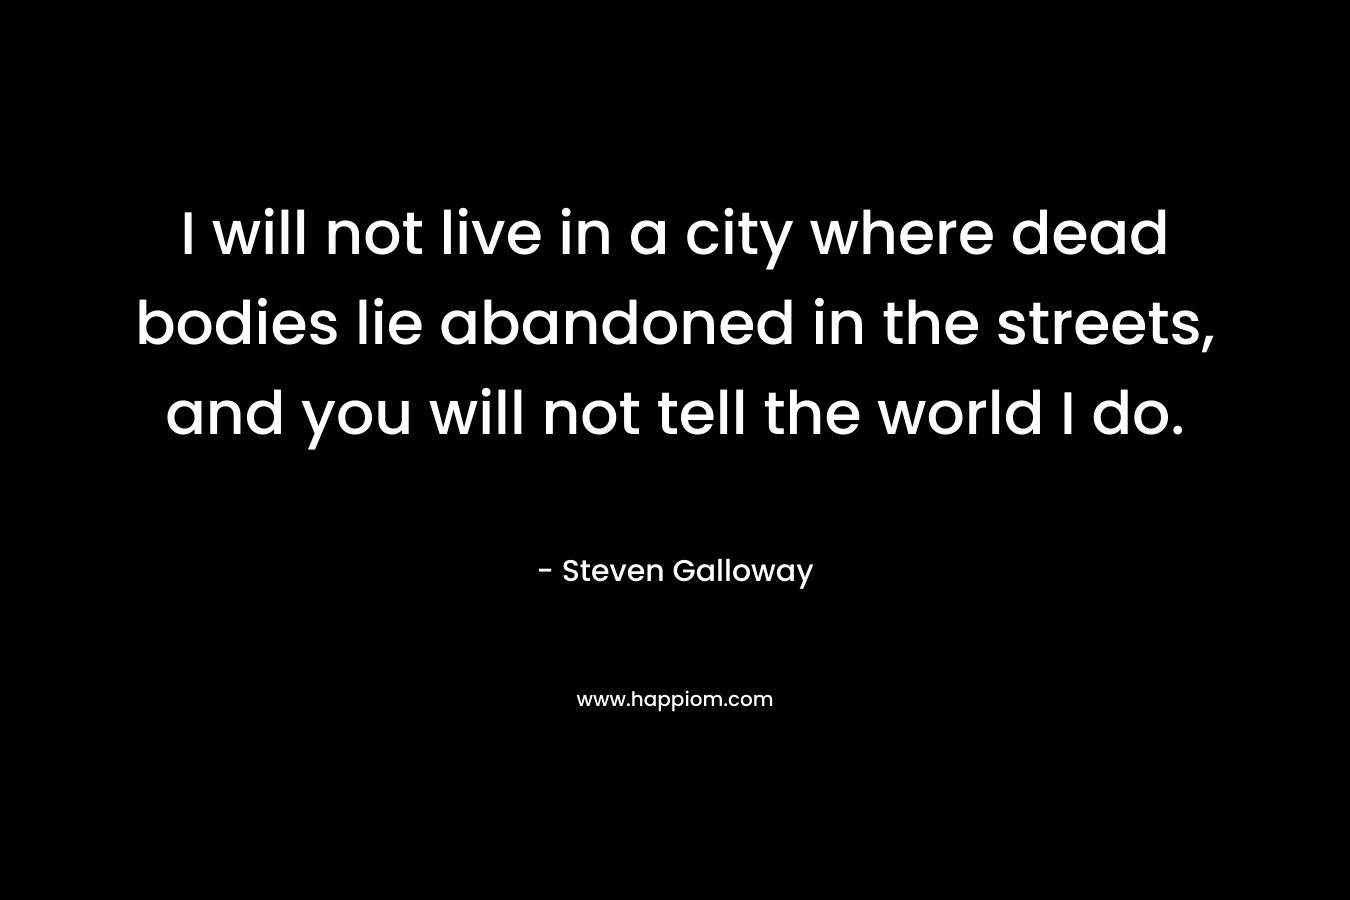 I will not live in a city where dead bodies lie abandoned in the streets, and you will not tell the world I do. – Steven Galloway